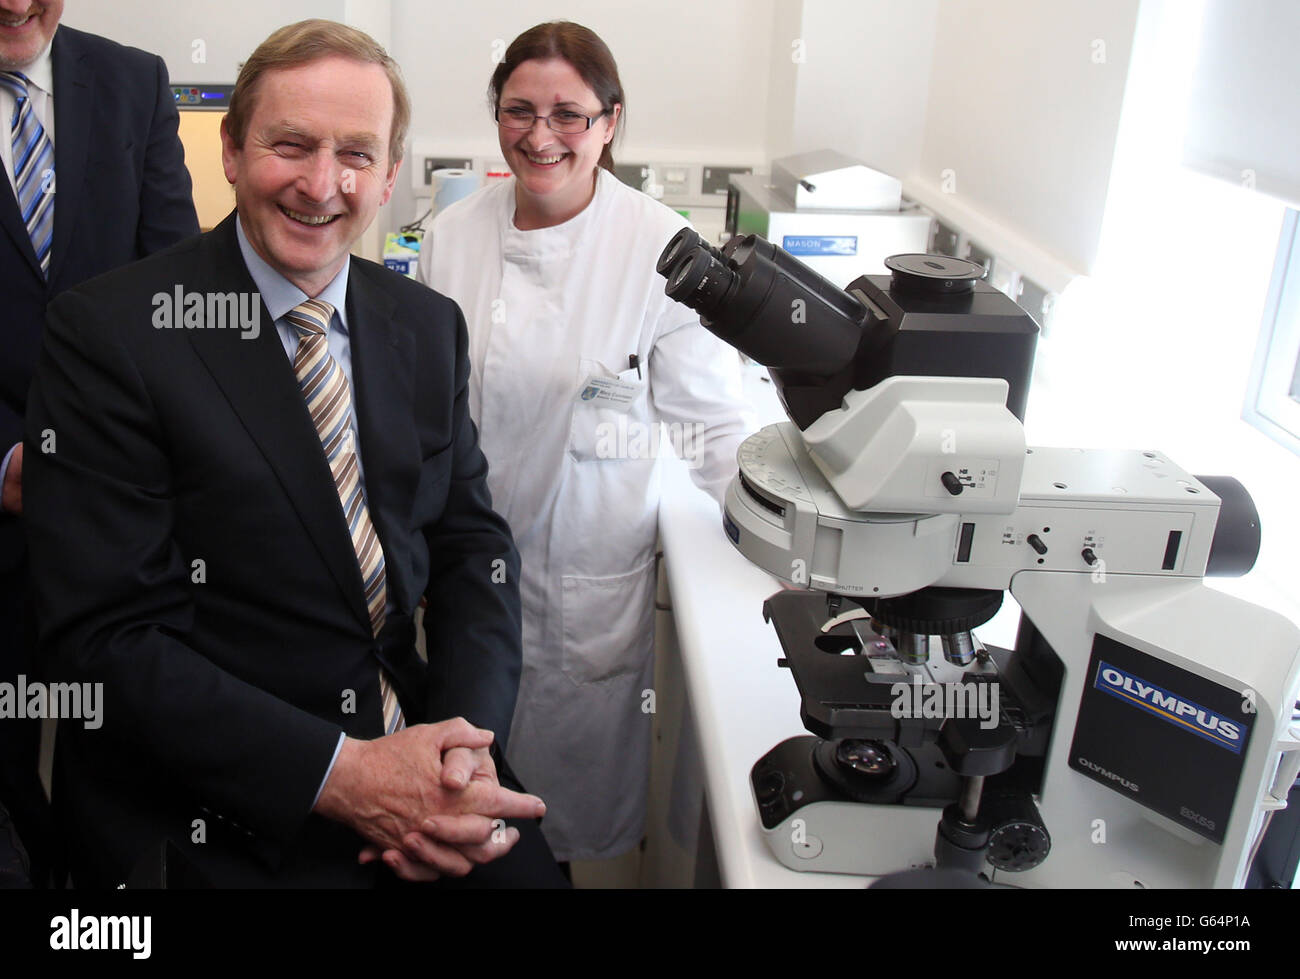 Taoiseach Enda Kenny with Bio Bank Technologist Mary Cunneen at the launch of a-state-of-the-art Clinical Research Facility, which is a joint initiative between Trinity College Dublin and St James' Hospital. Stock Photo